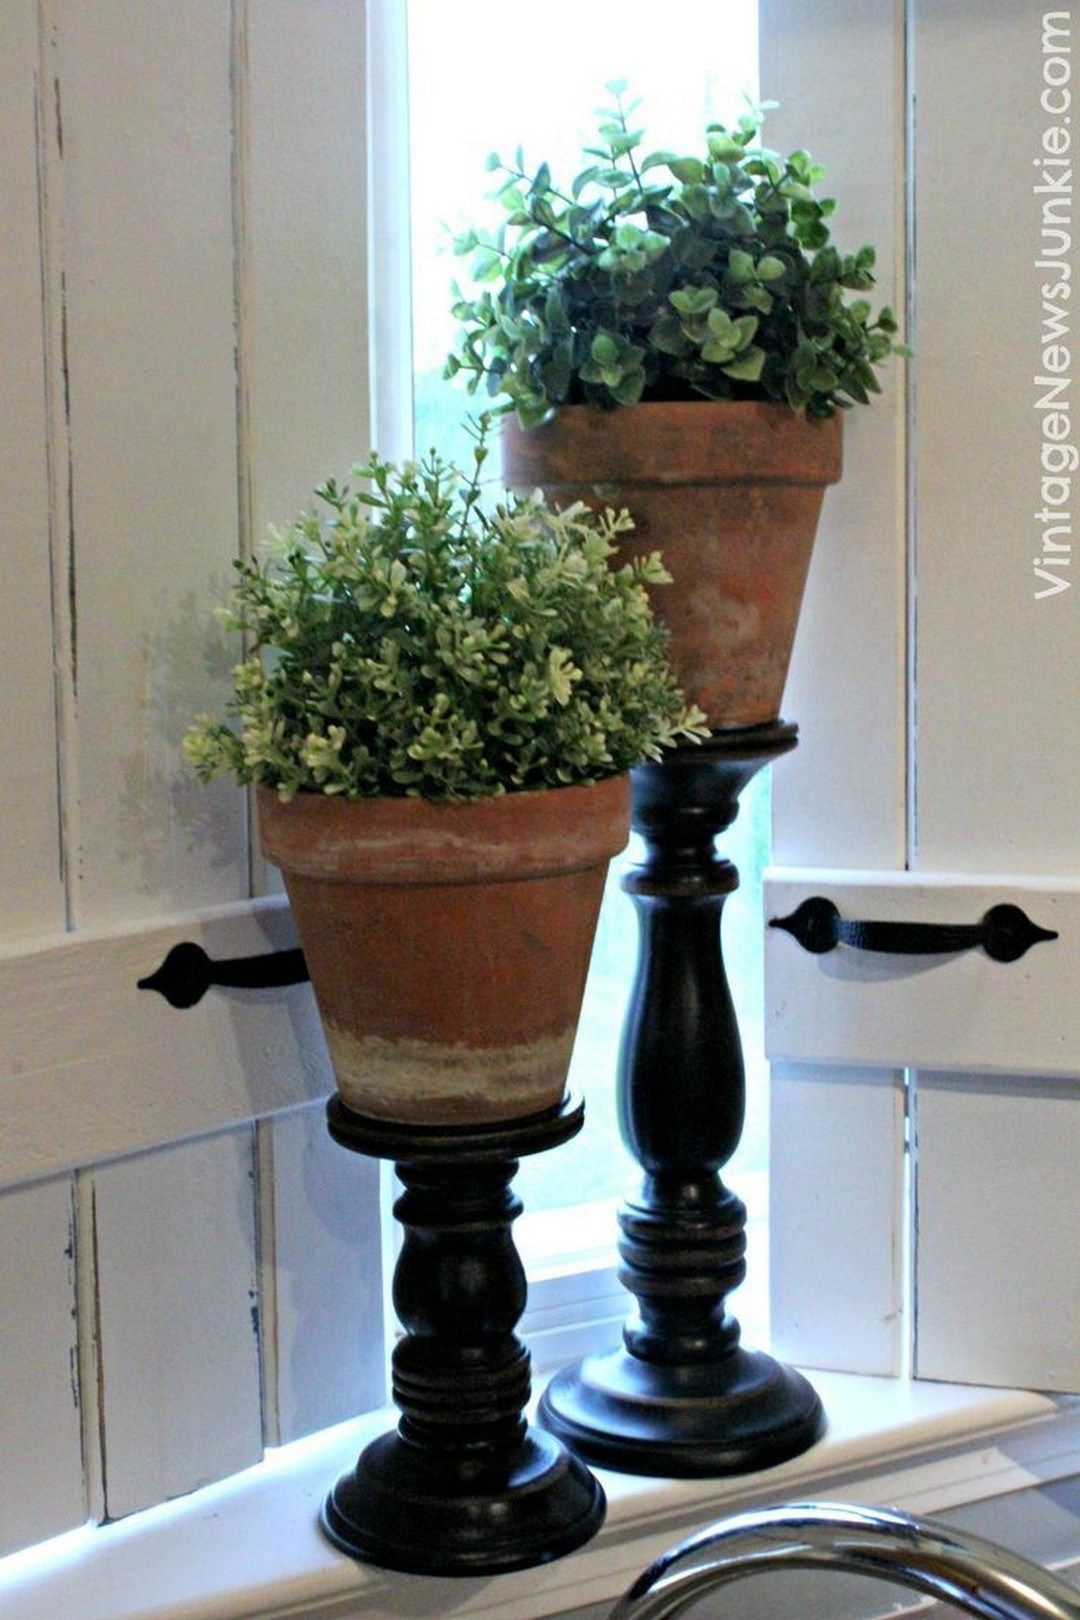 10 plants In Bedroom candle holders ideas